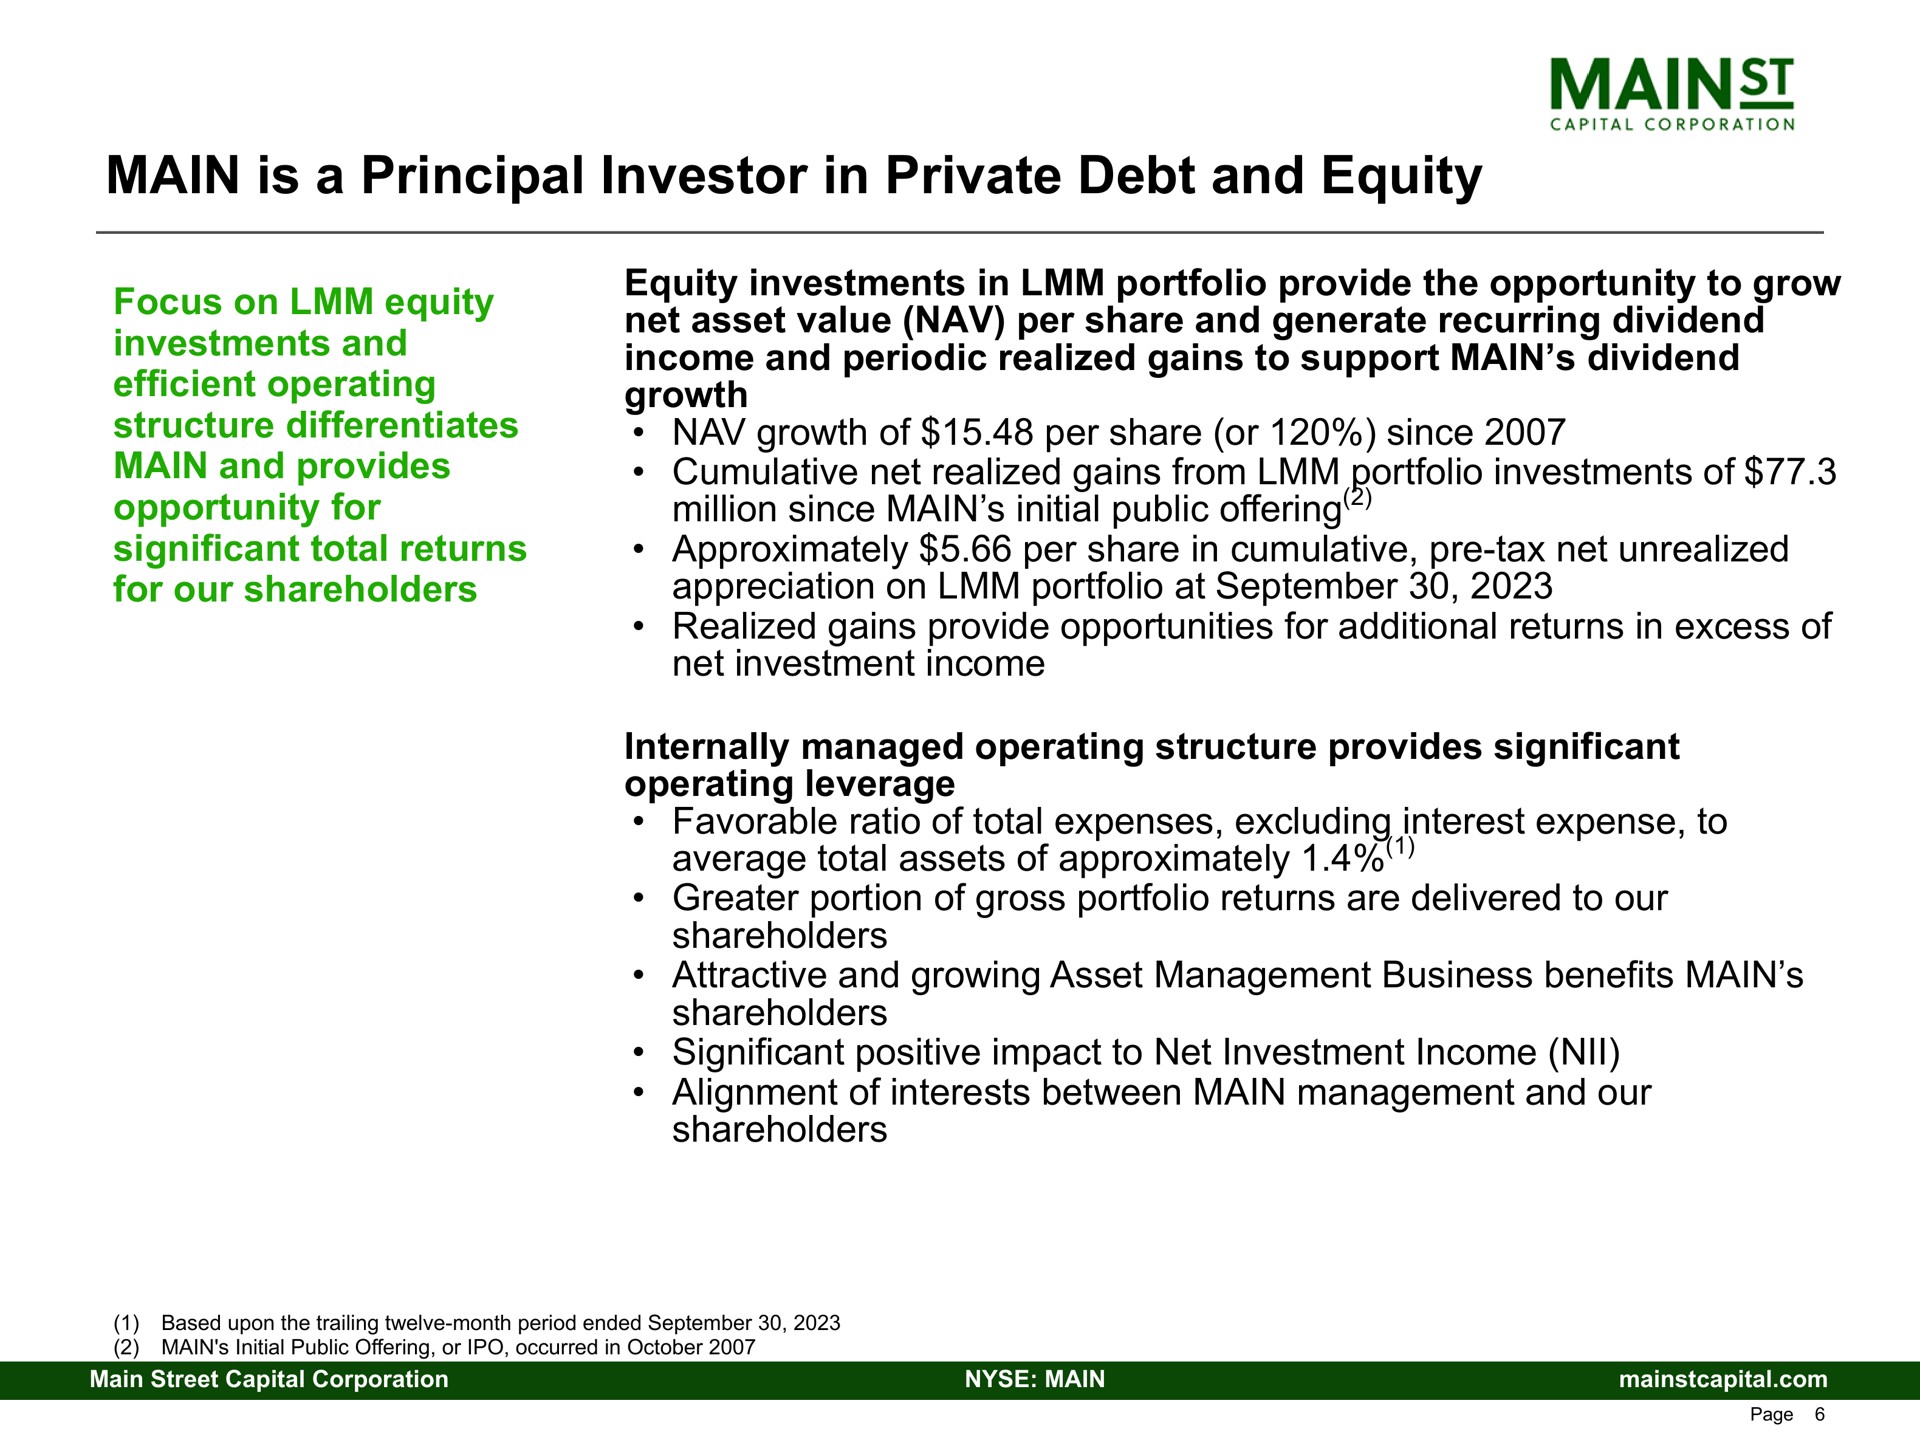 main is a principal investor in private debt and equity structure differentiates provides opportunity for growth of per share or since cumulative net realized gains from portfolio investments of million since initial public offering | Main Street Capital